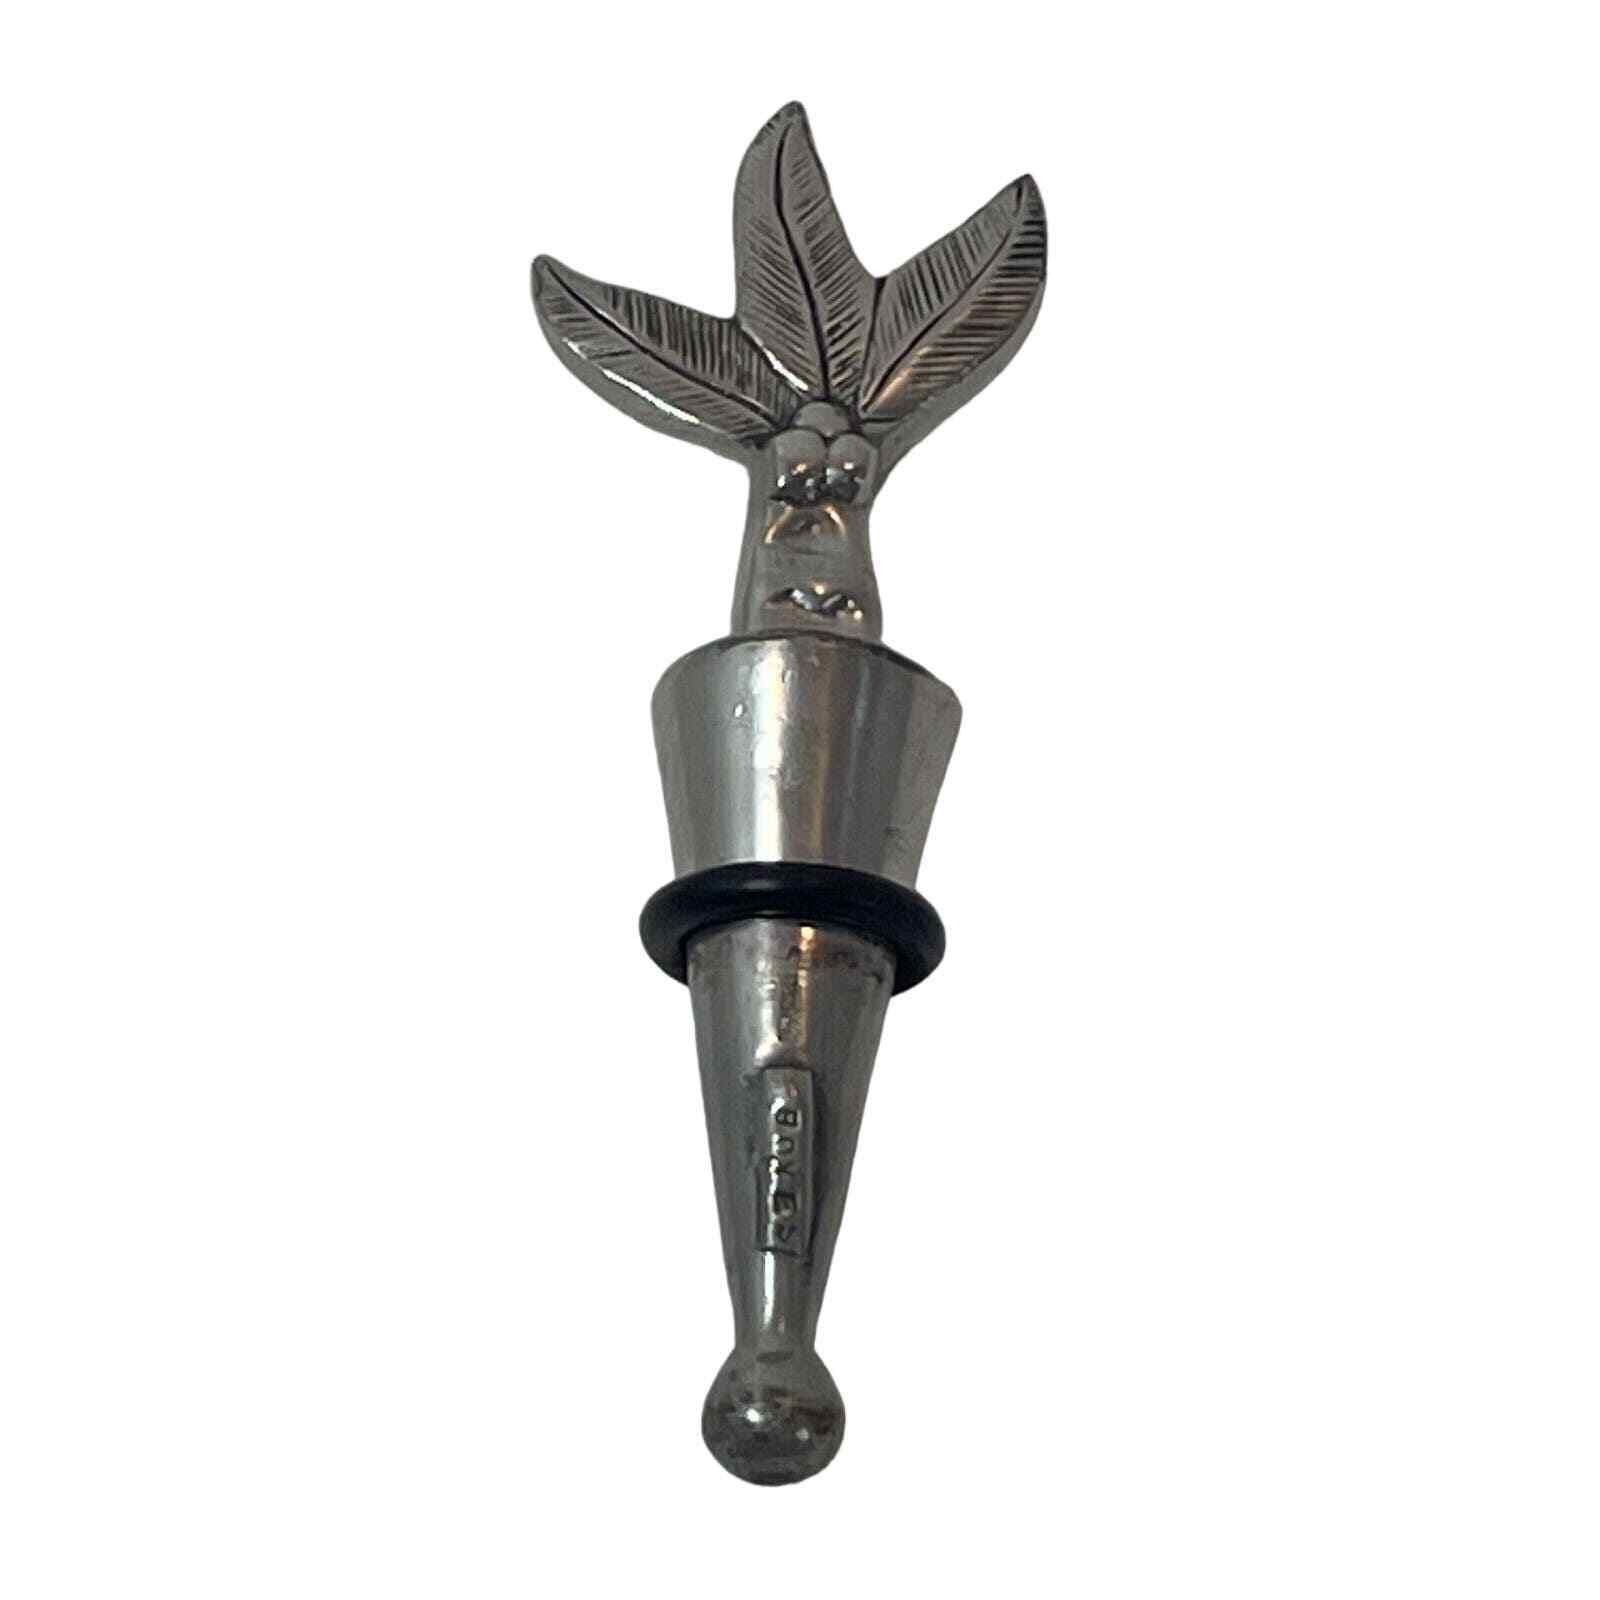 Carroll Boyes Wine Bottle Stopper Coconut Palm Tree Figural Pewter South Africa